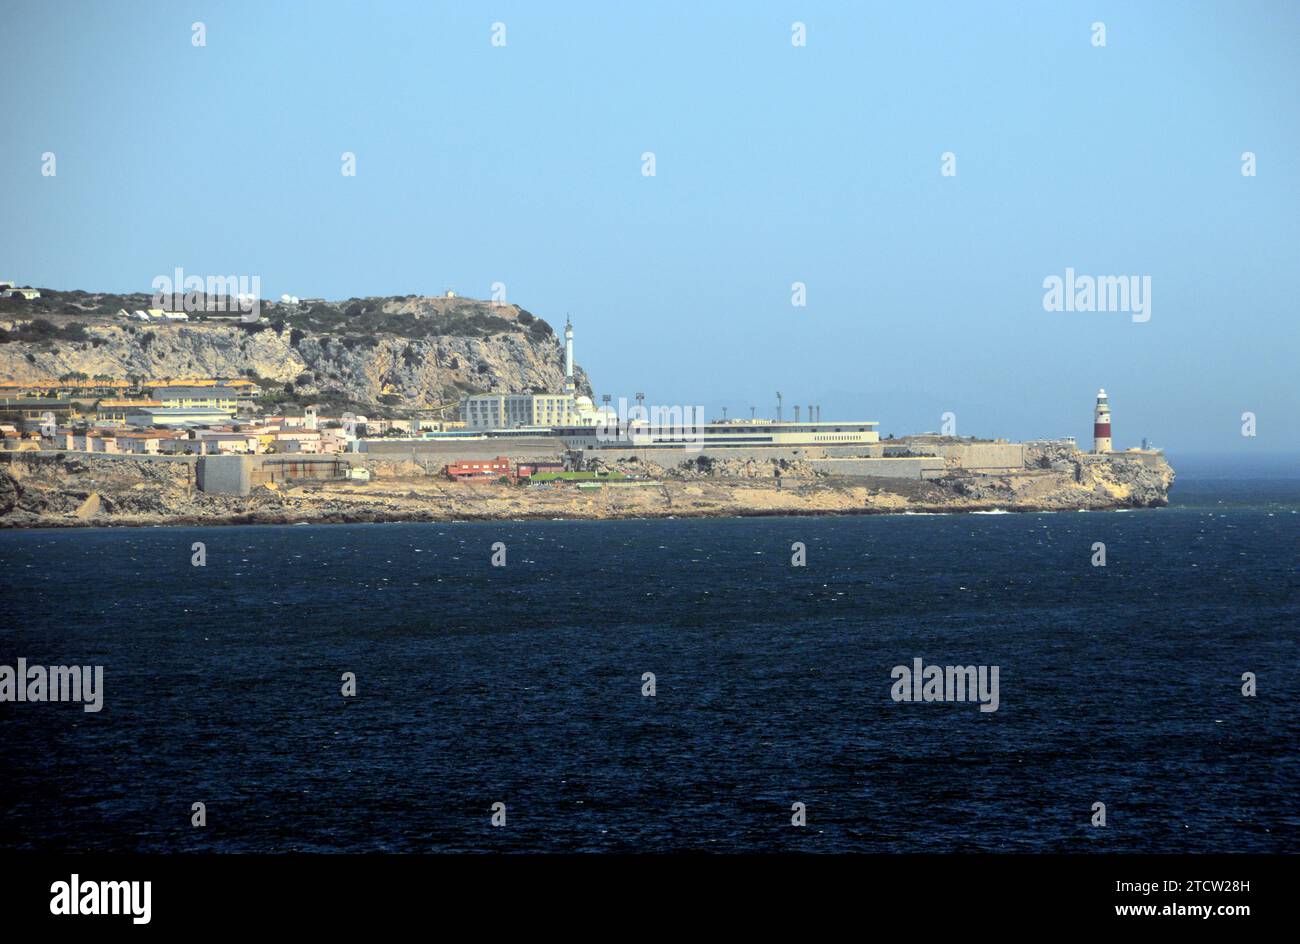 The Rock of Gibraltar, 'Ibrahim al Ibrahim Mosque' and the 'Trinity Lighthouse' at Europa Point in Gibraltar, British Overseas Territory, Spain, EU. Stock Photo